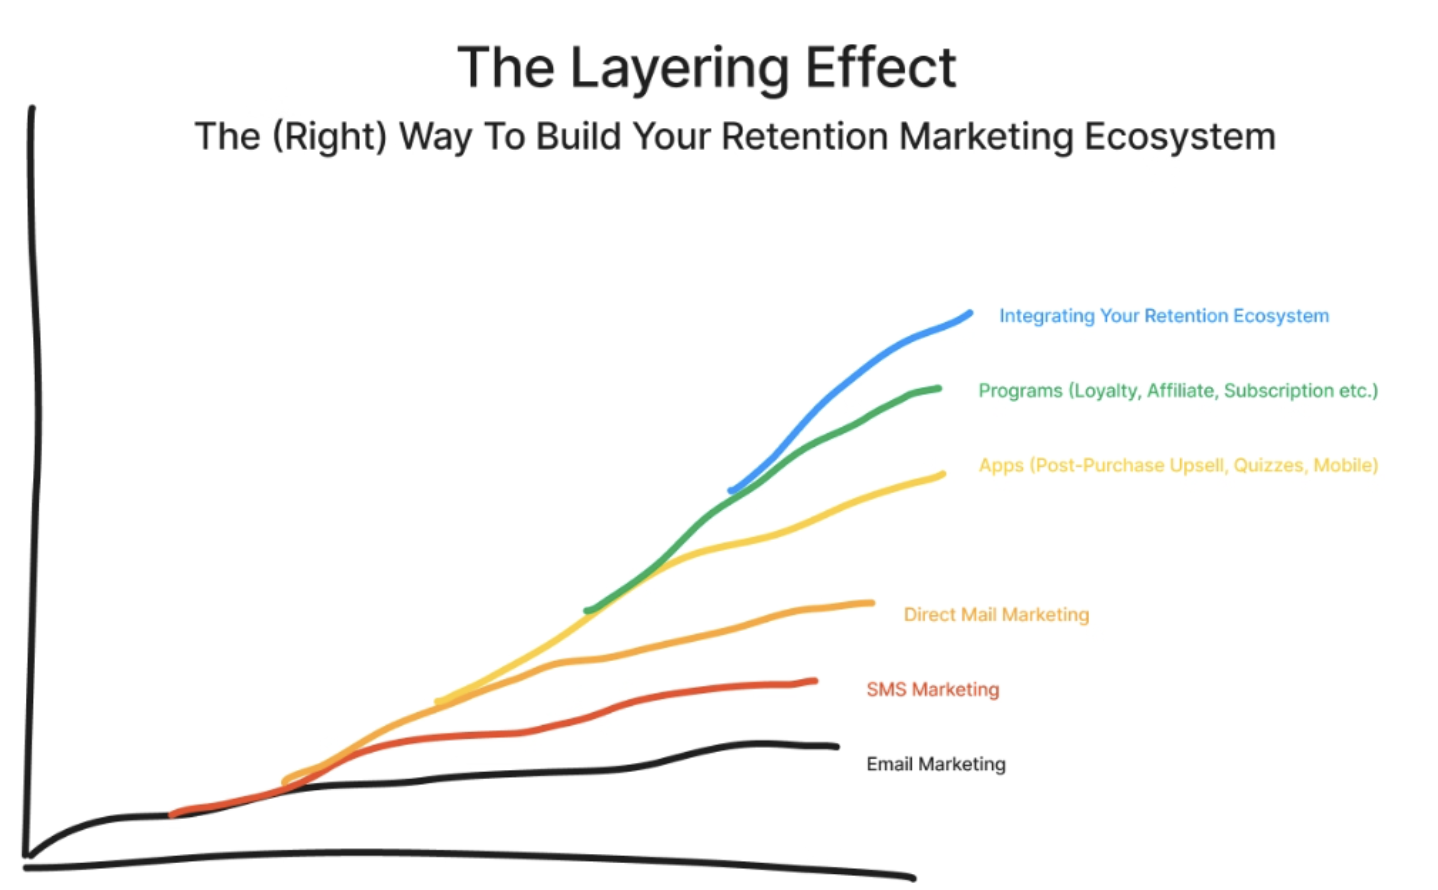 The Layering Effect